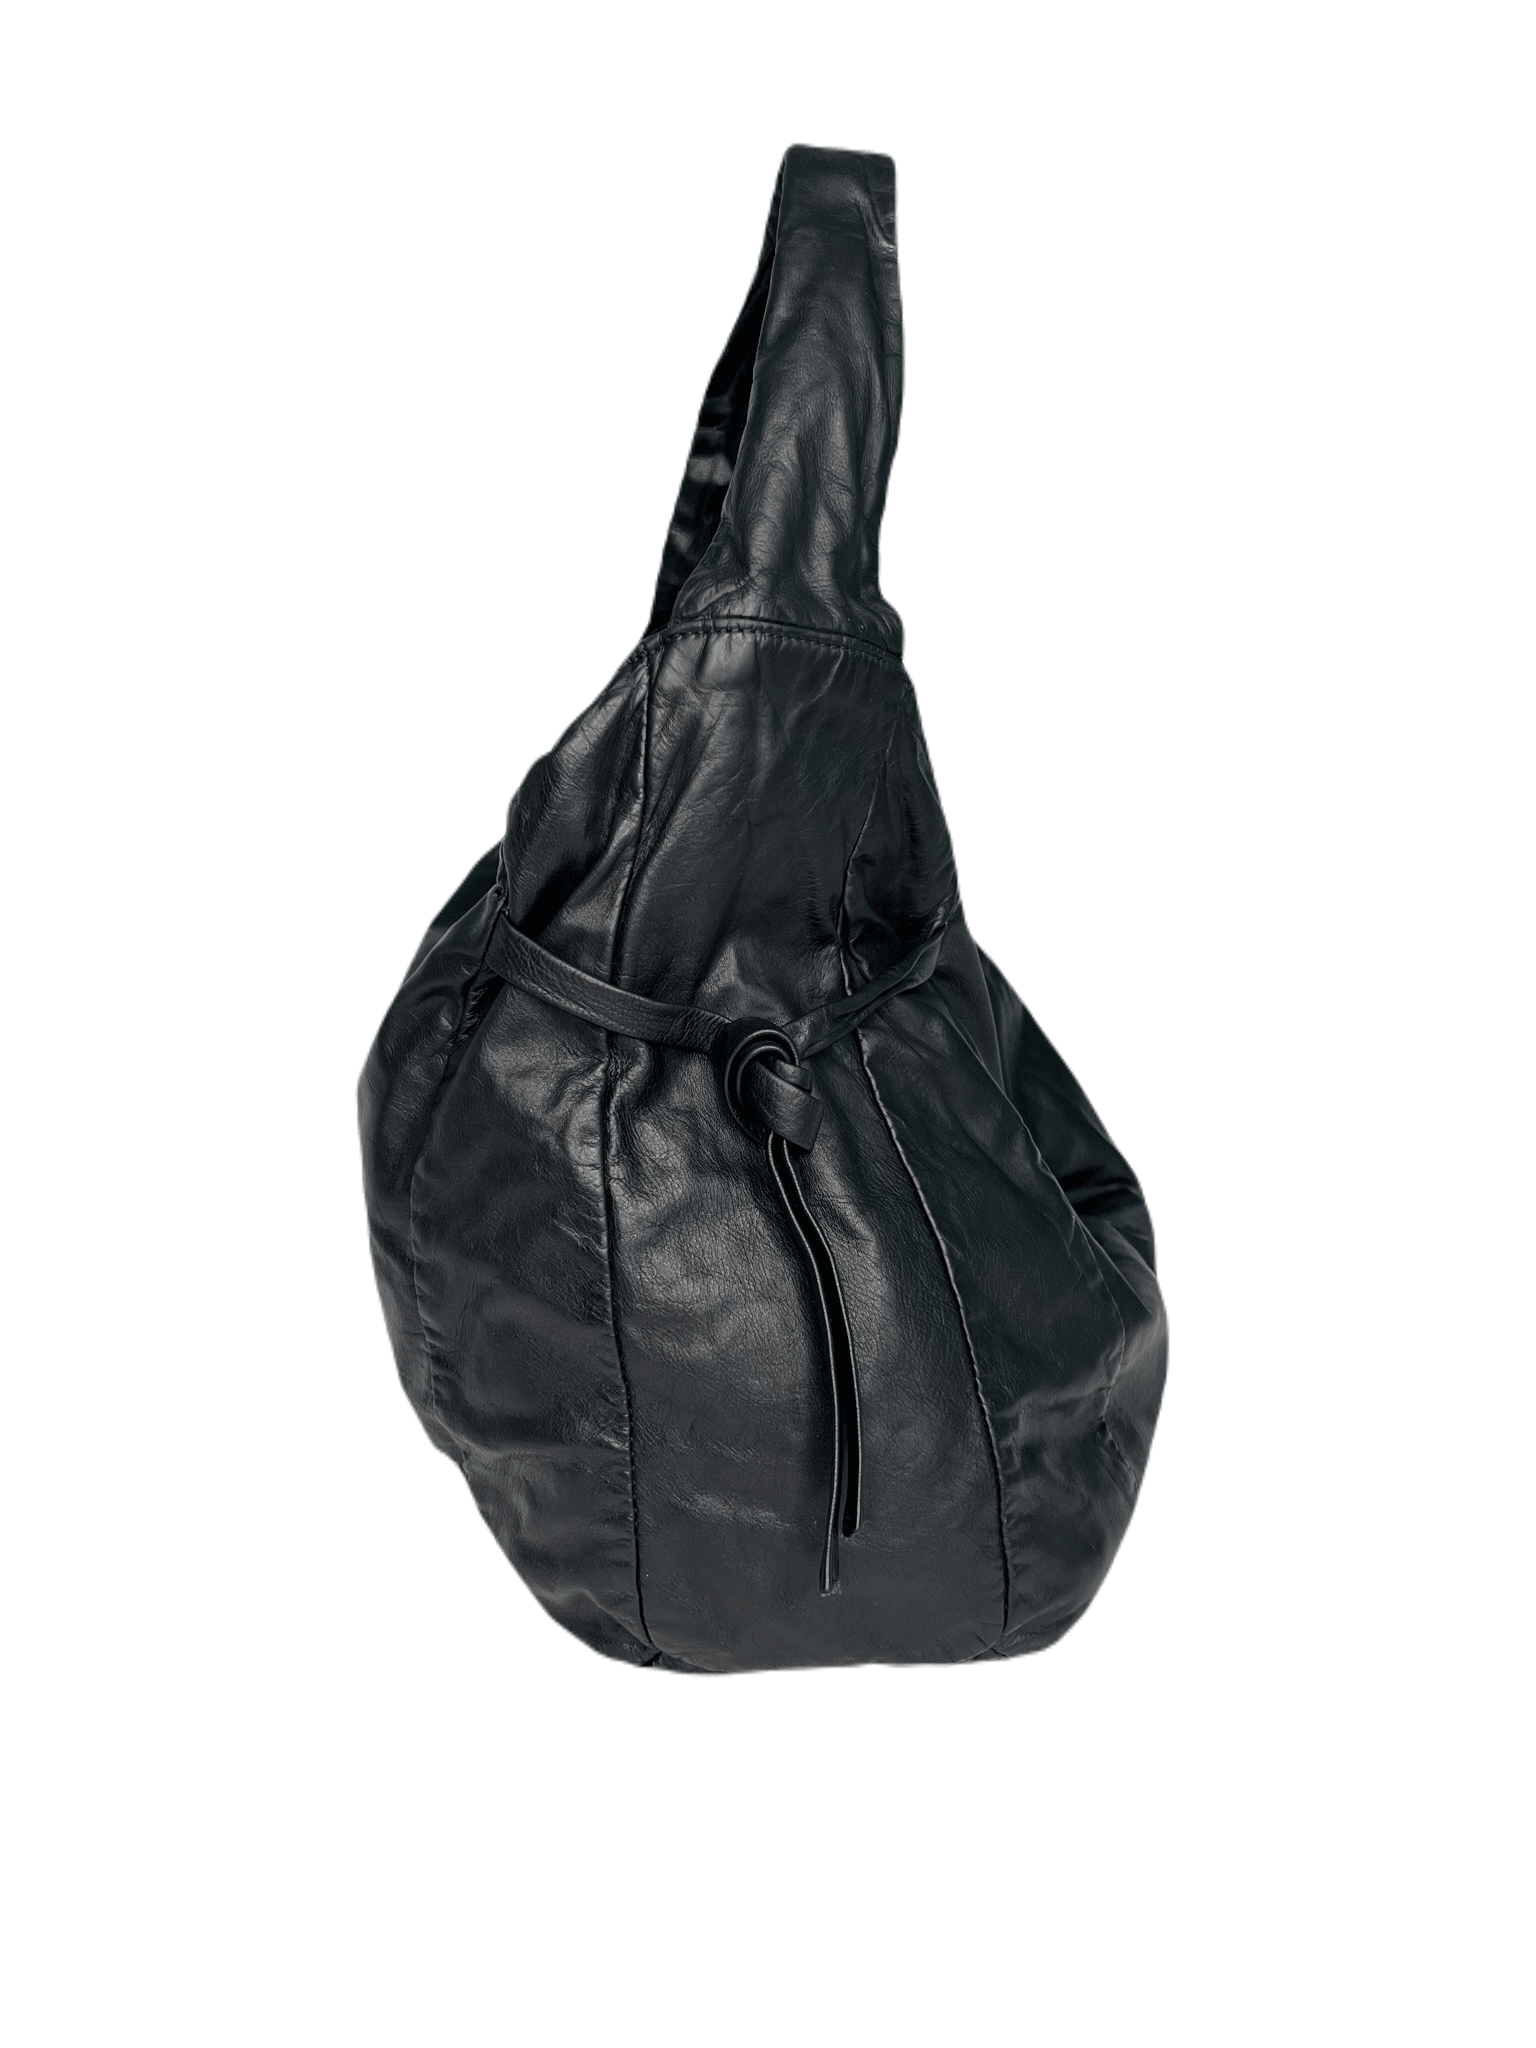 Hysteria Slouch Leather Handbag - Endless